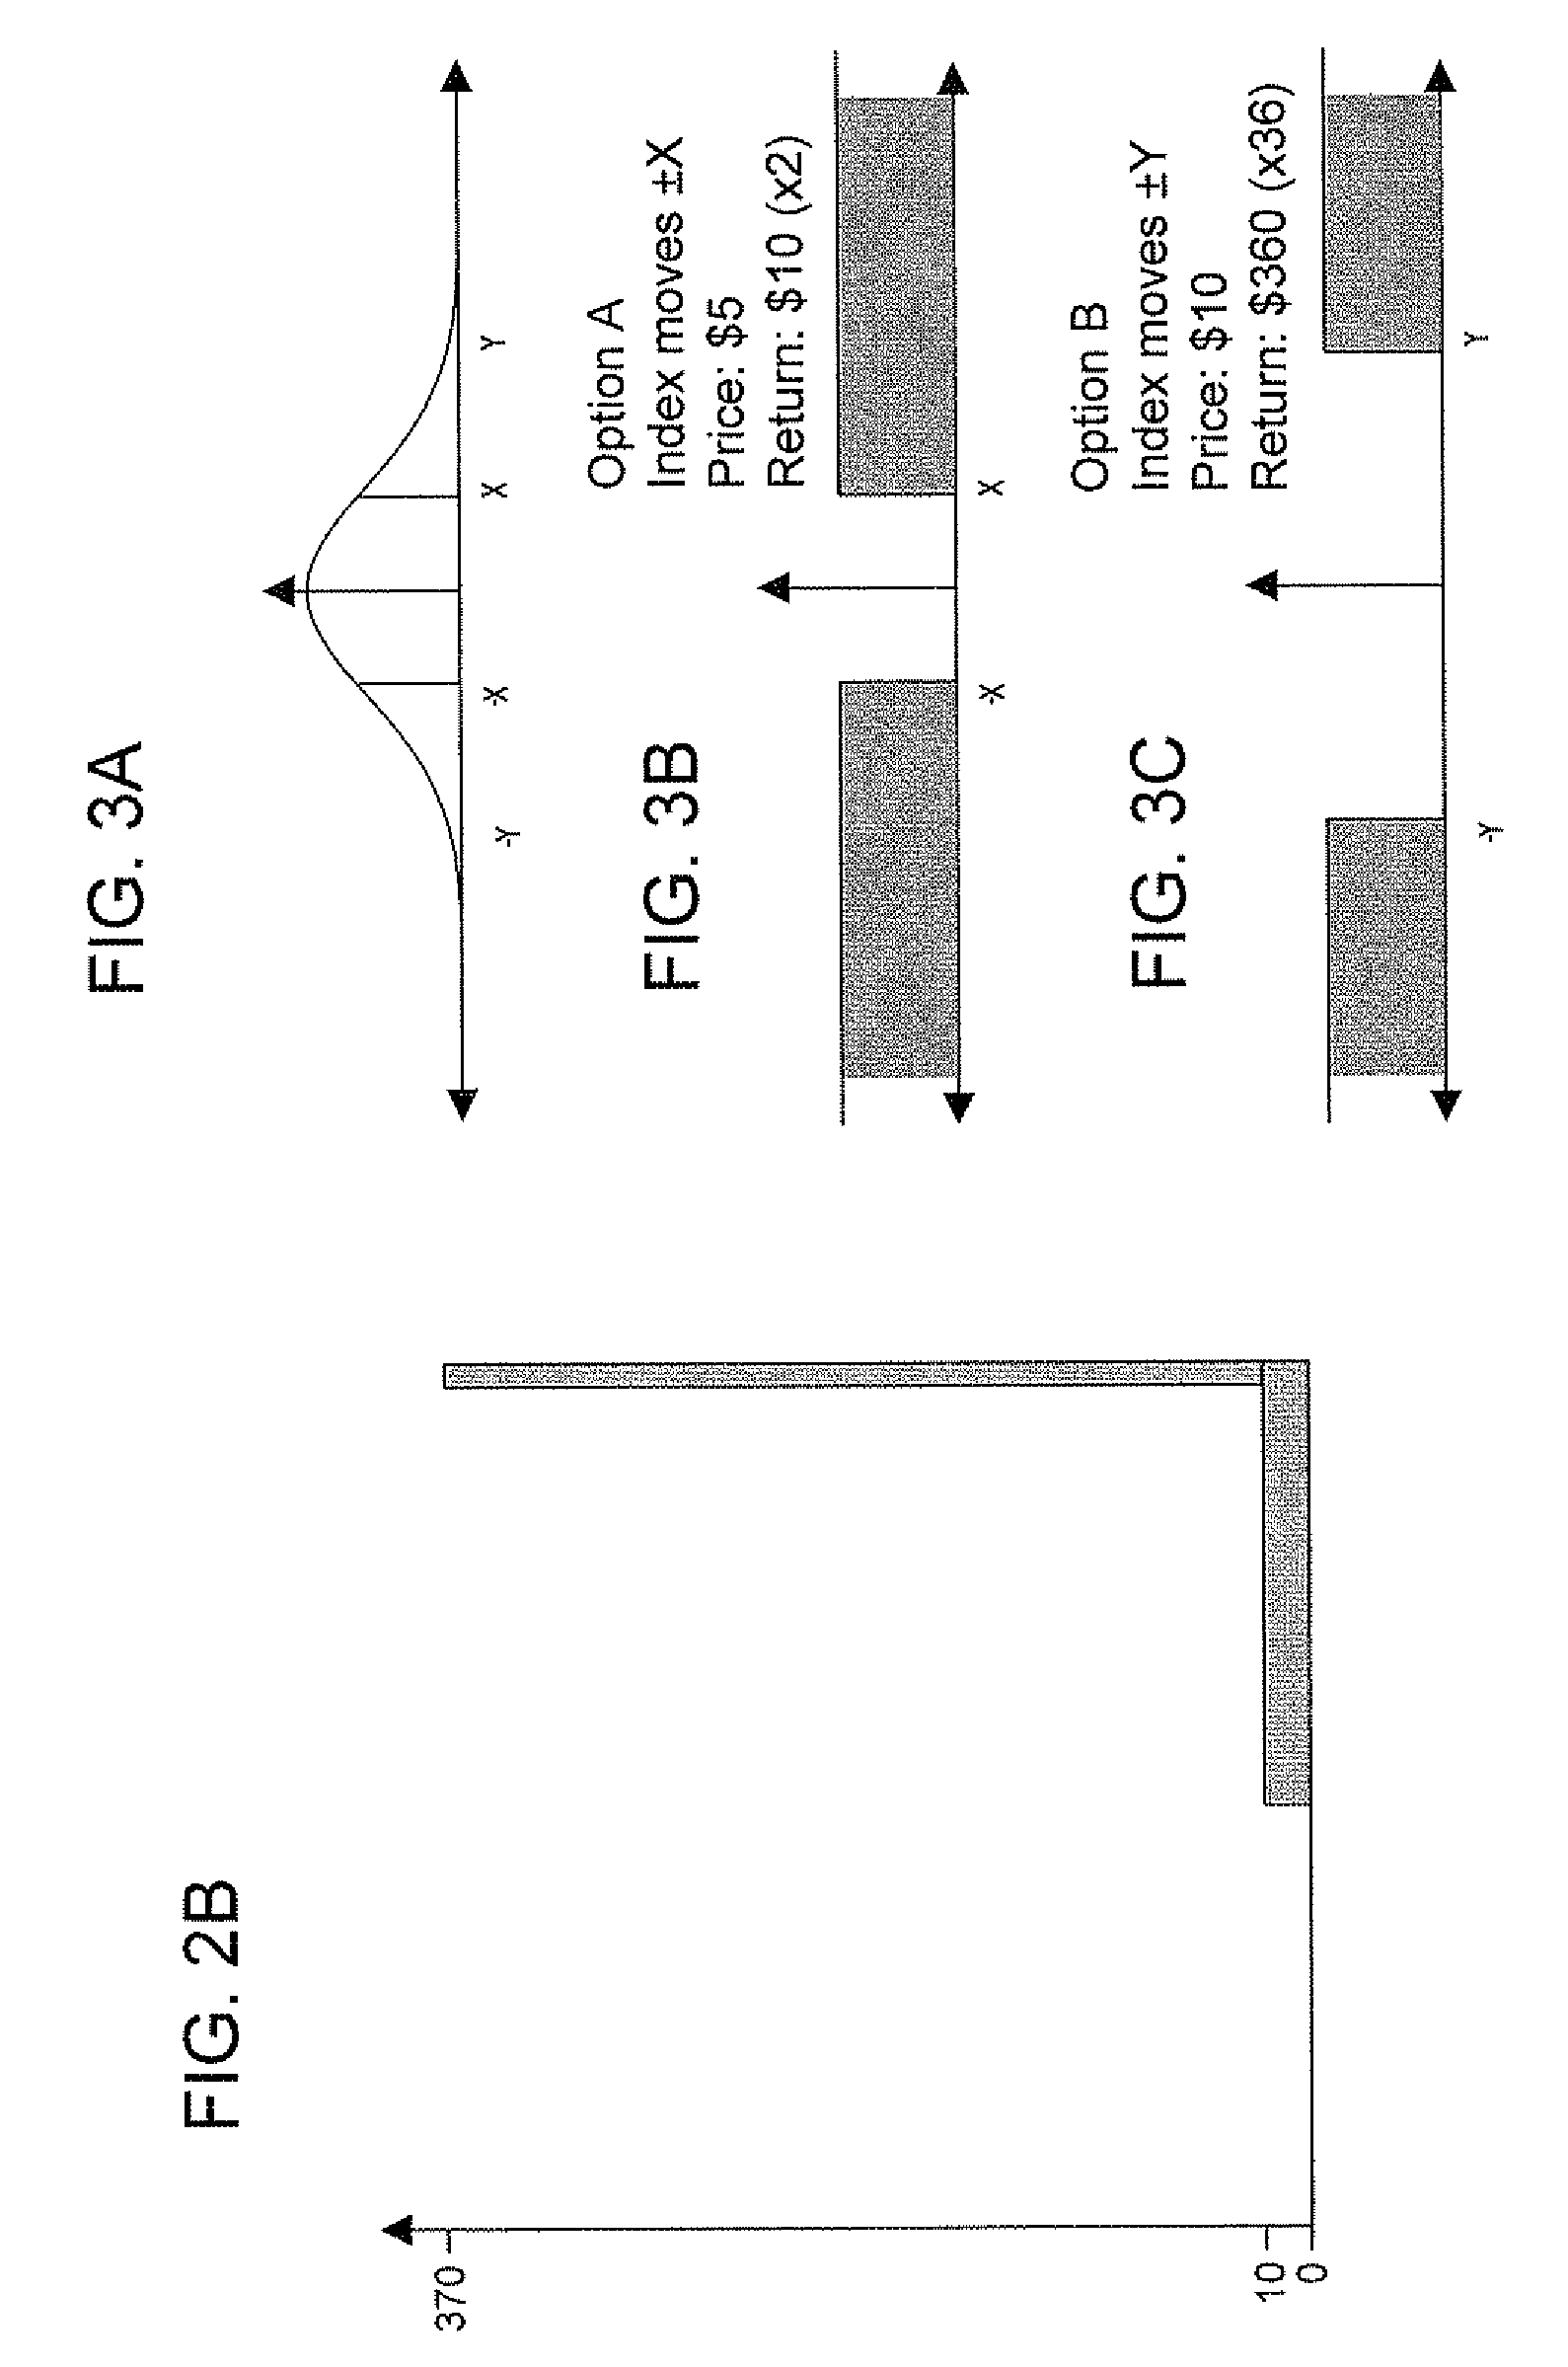 System, method and graphic user interface for simulated gaming experience based on financial transactions